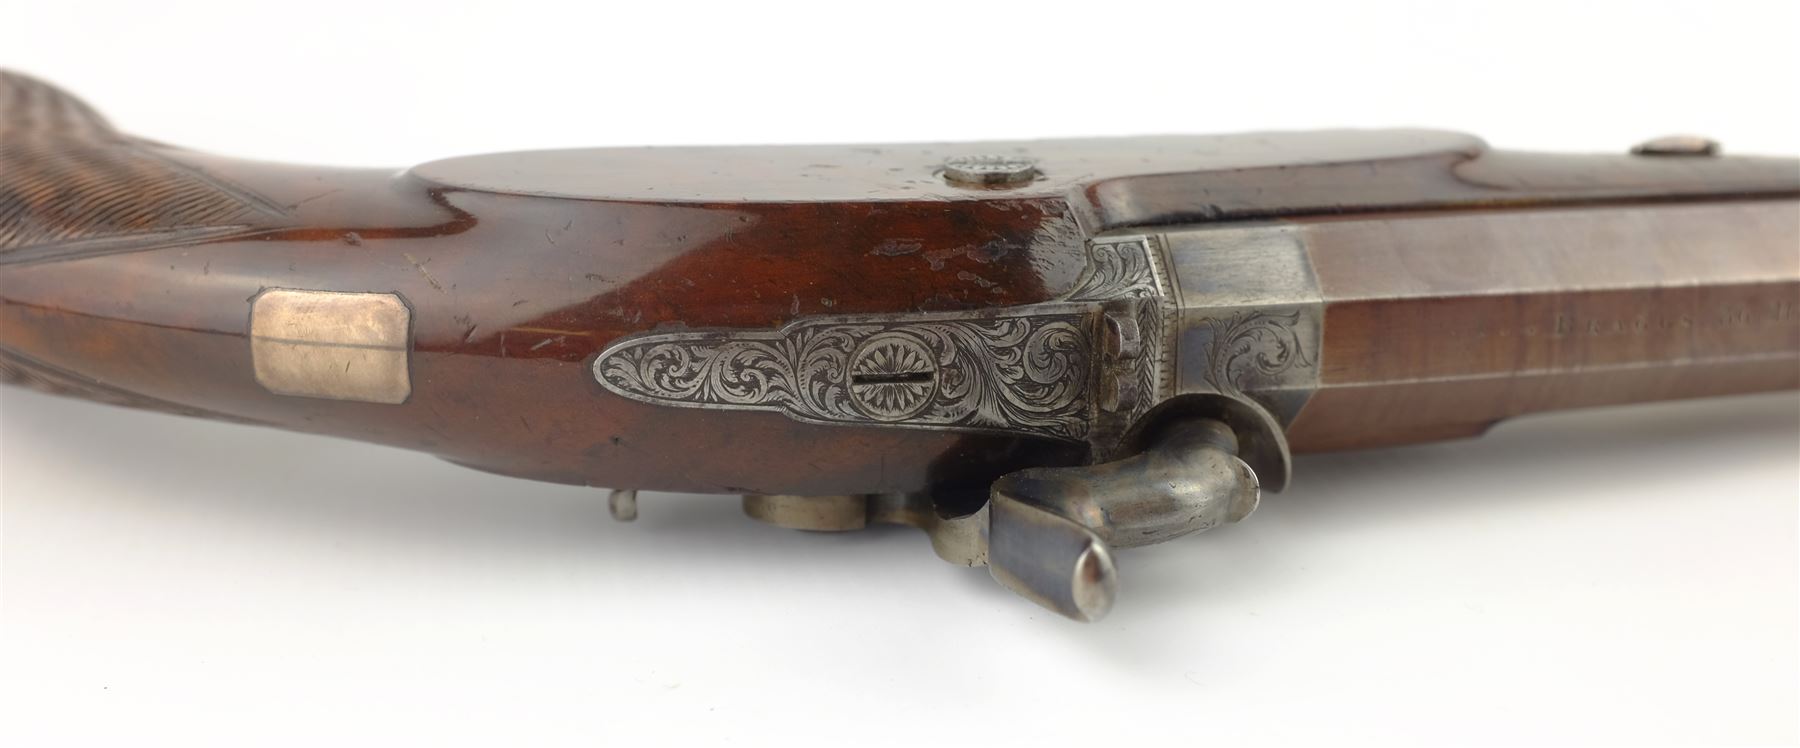 Rare pair of London 40 bore Officer's percussion duelling pistols by Robert Braggs c1830/40 - Image 8 of 12